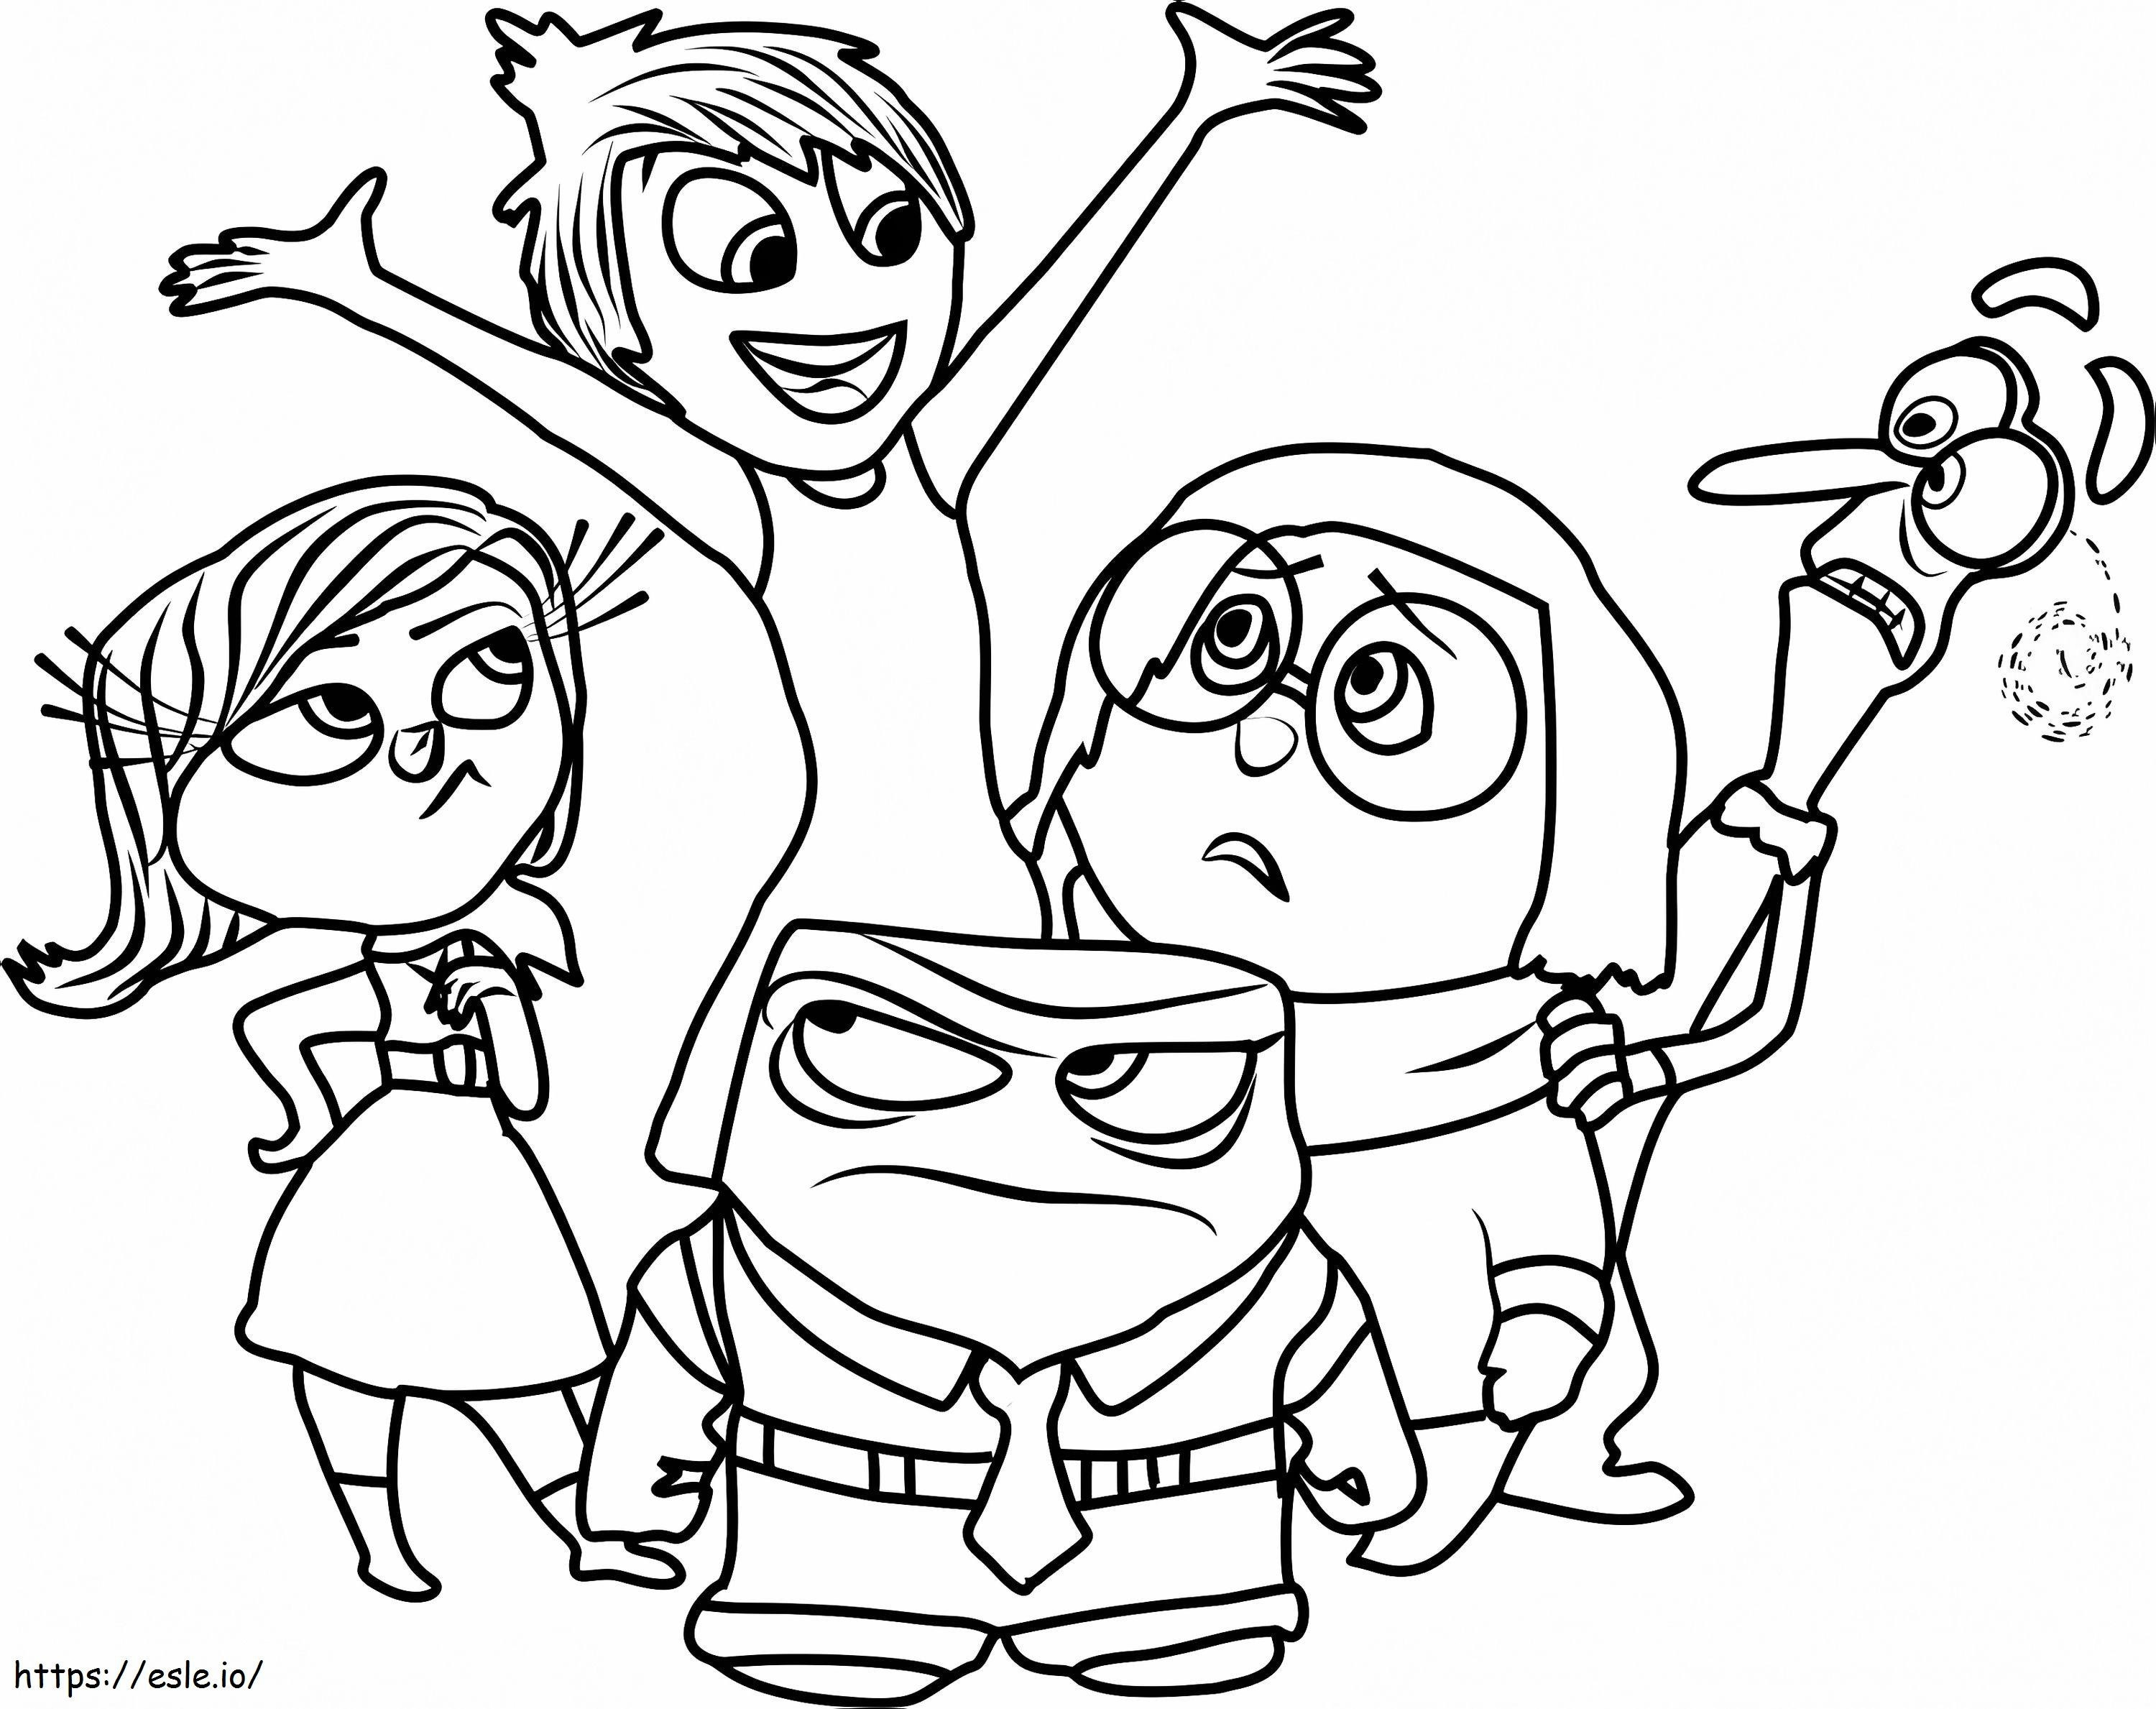 Inside Out Team coloring page